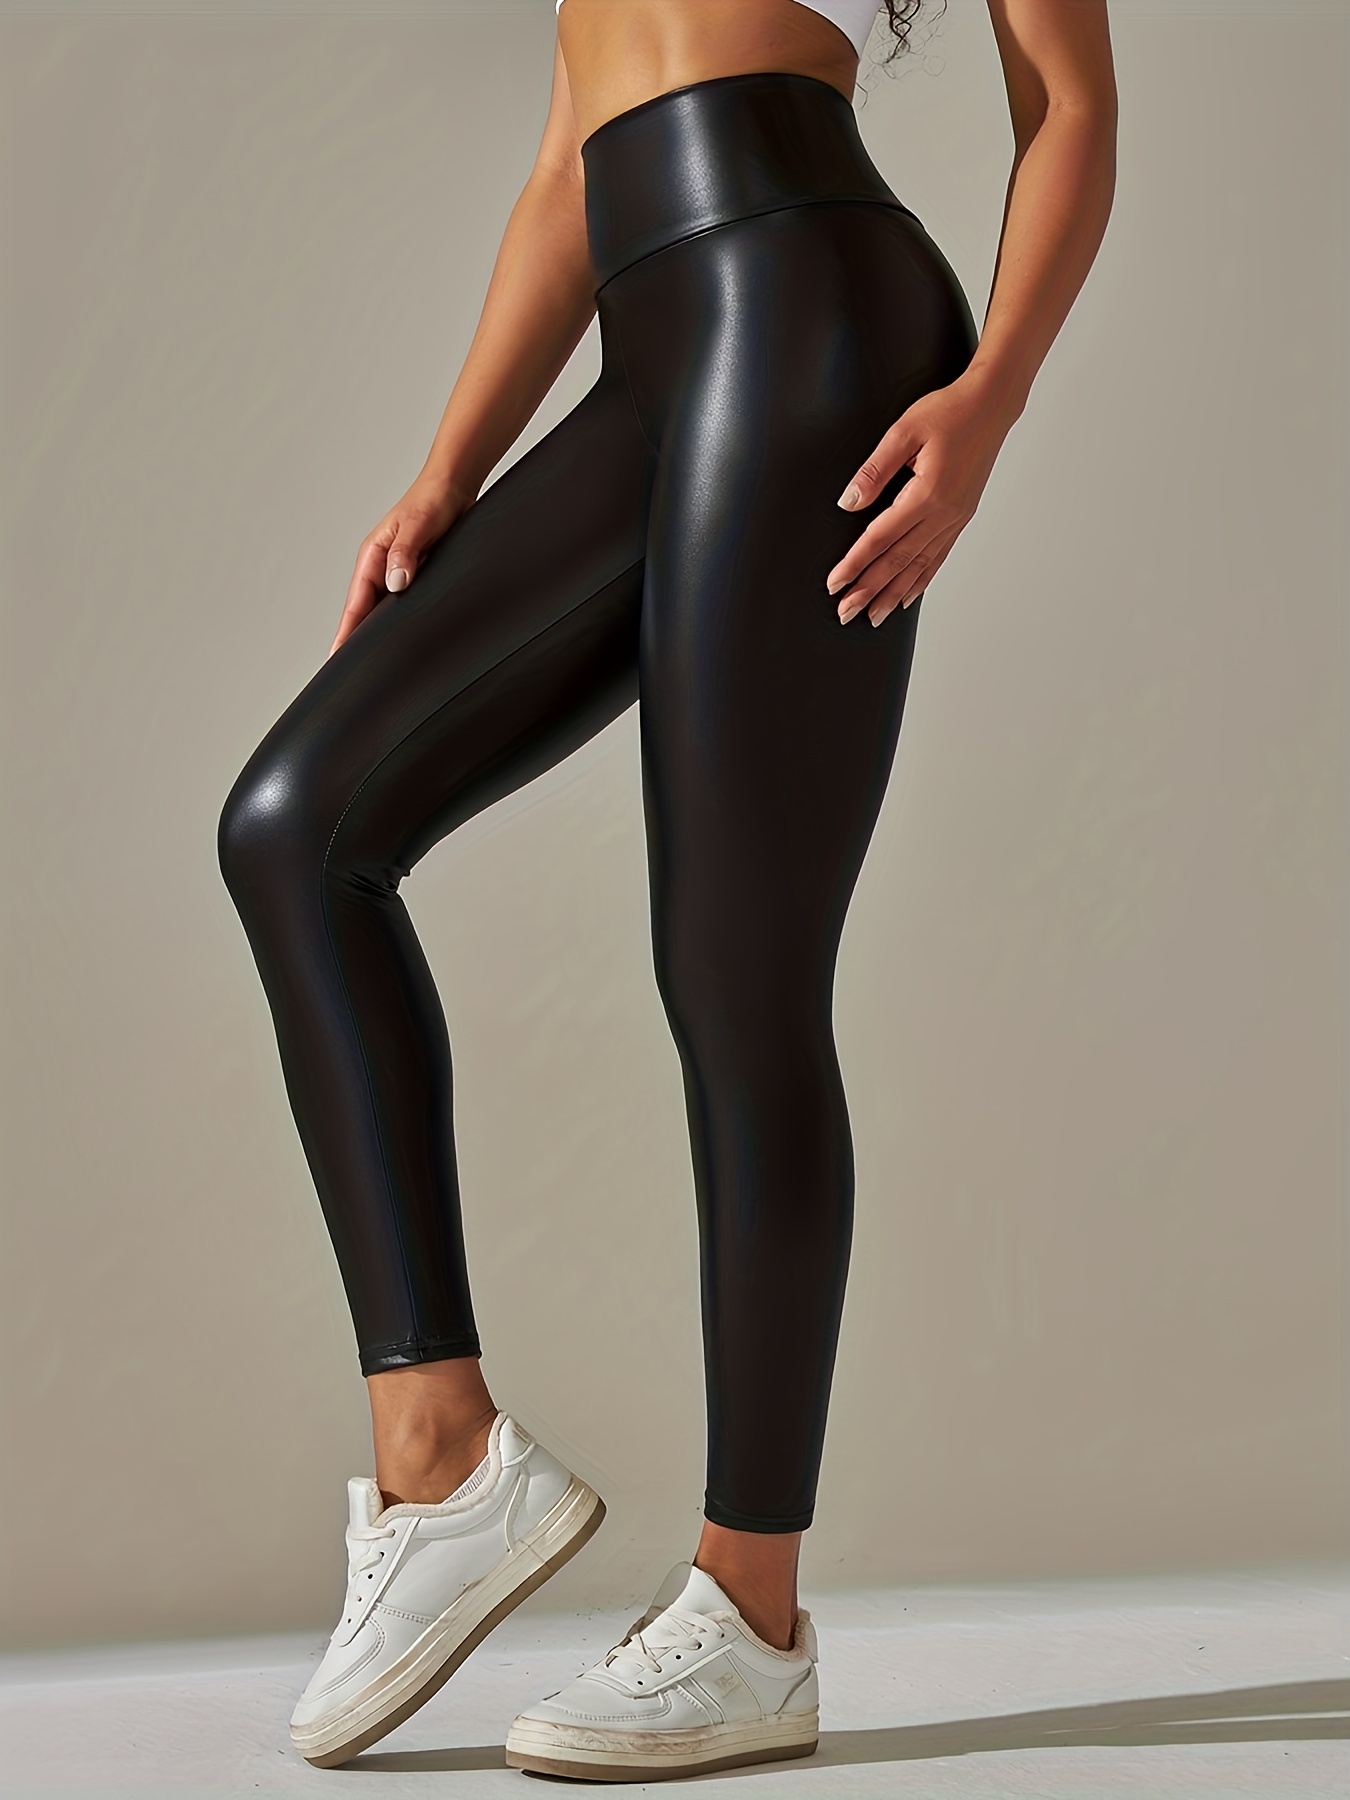 Womens Black Faux Leather Leggings Stretch Sexy High Waisted Slimming  Skinny S